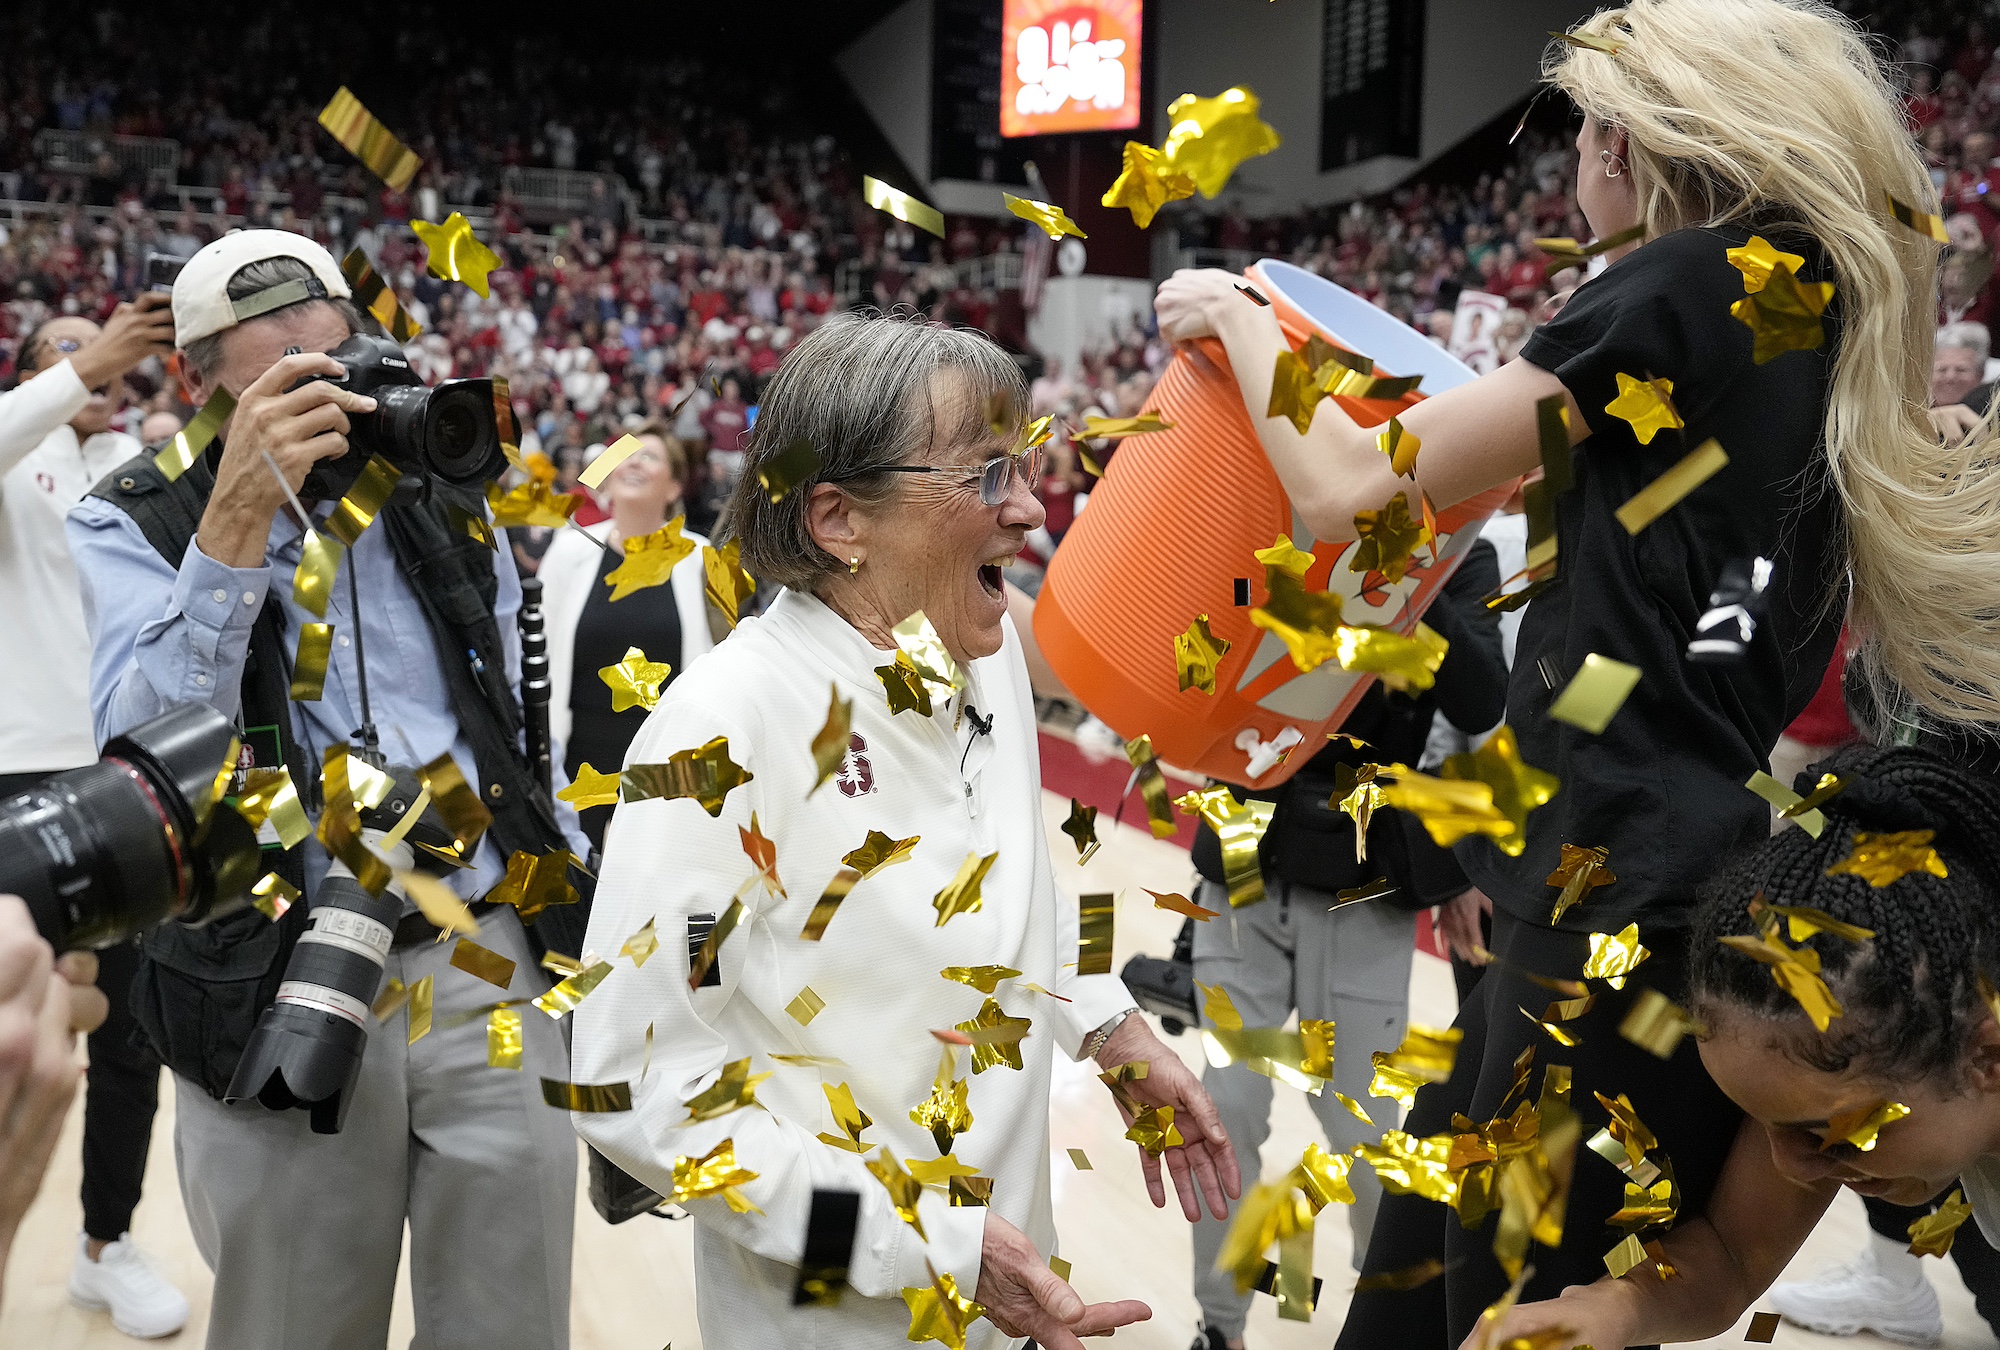 PALO ALTO, CALIFORNIA - JANUARY 21: Head coach Tara VanDerveer of the Stanford Cardinal celebrates with her player Cameron Brink #22 after Stanford defeated the Oregon State Beavers 65-56 at Stanford Maples Pavilion on January 21, 2024 in Palo Alto, California. Tara VanDerveer recorded her 1,203 NCAA career victory passing Mike Krzyzewski with 1,202 NCAA career wins. (Photo by Thearon W. Henderson/Getty Images)